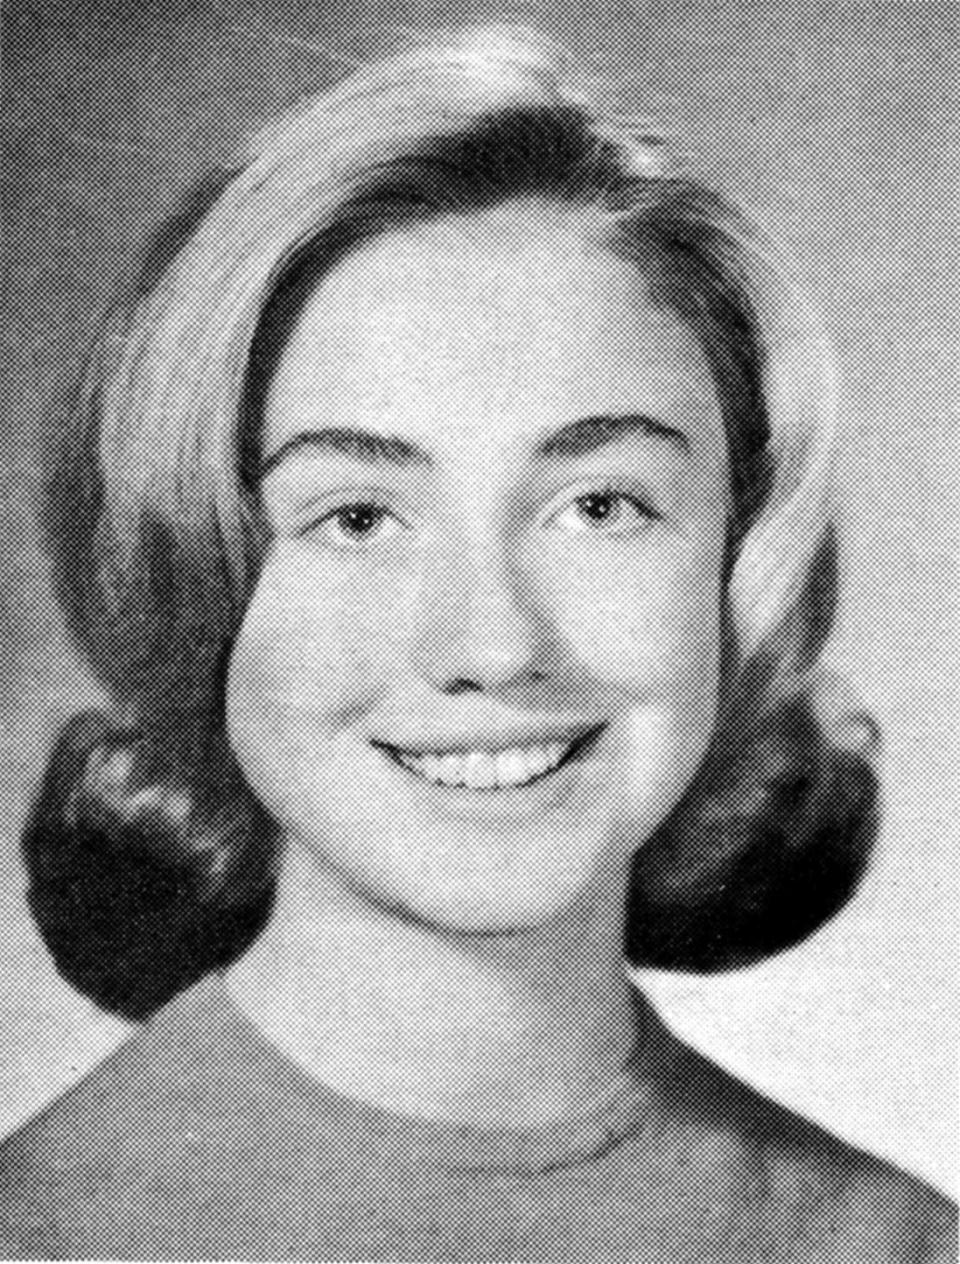 <p>It was all about the hair for the young politician. During her high school years outside of Chicago, the former New York senator kept her locks bouffant and flipped in the popular '60s style.</p>